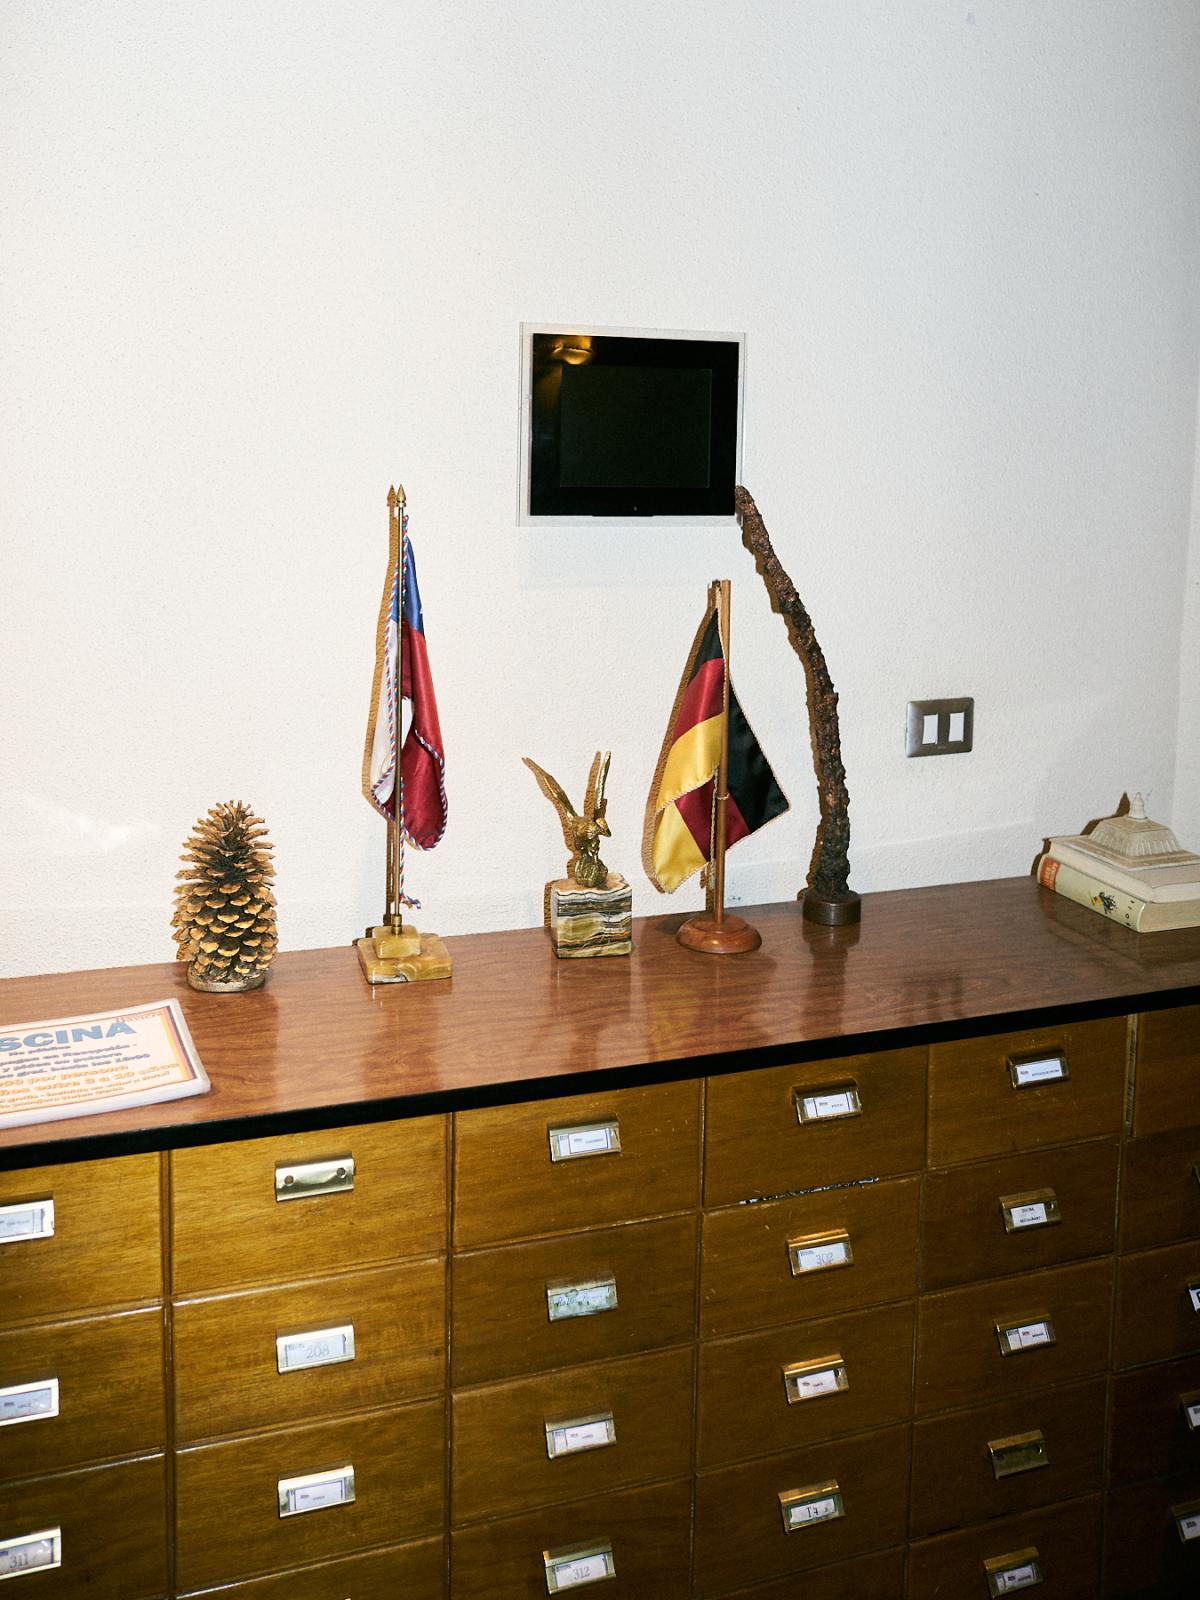 II. The brief glimpse of a settler's dream - Chilean and German flags behind the desk in the...